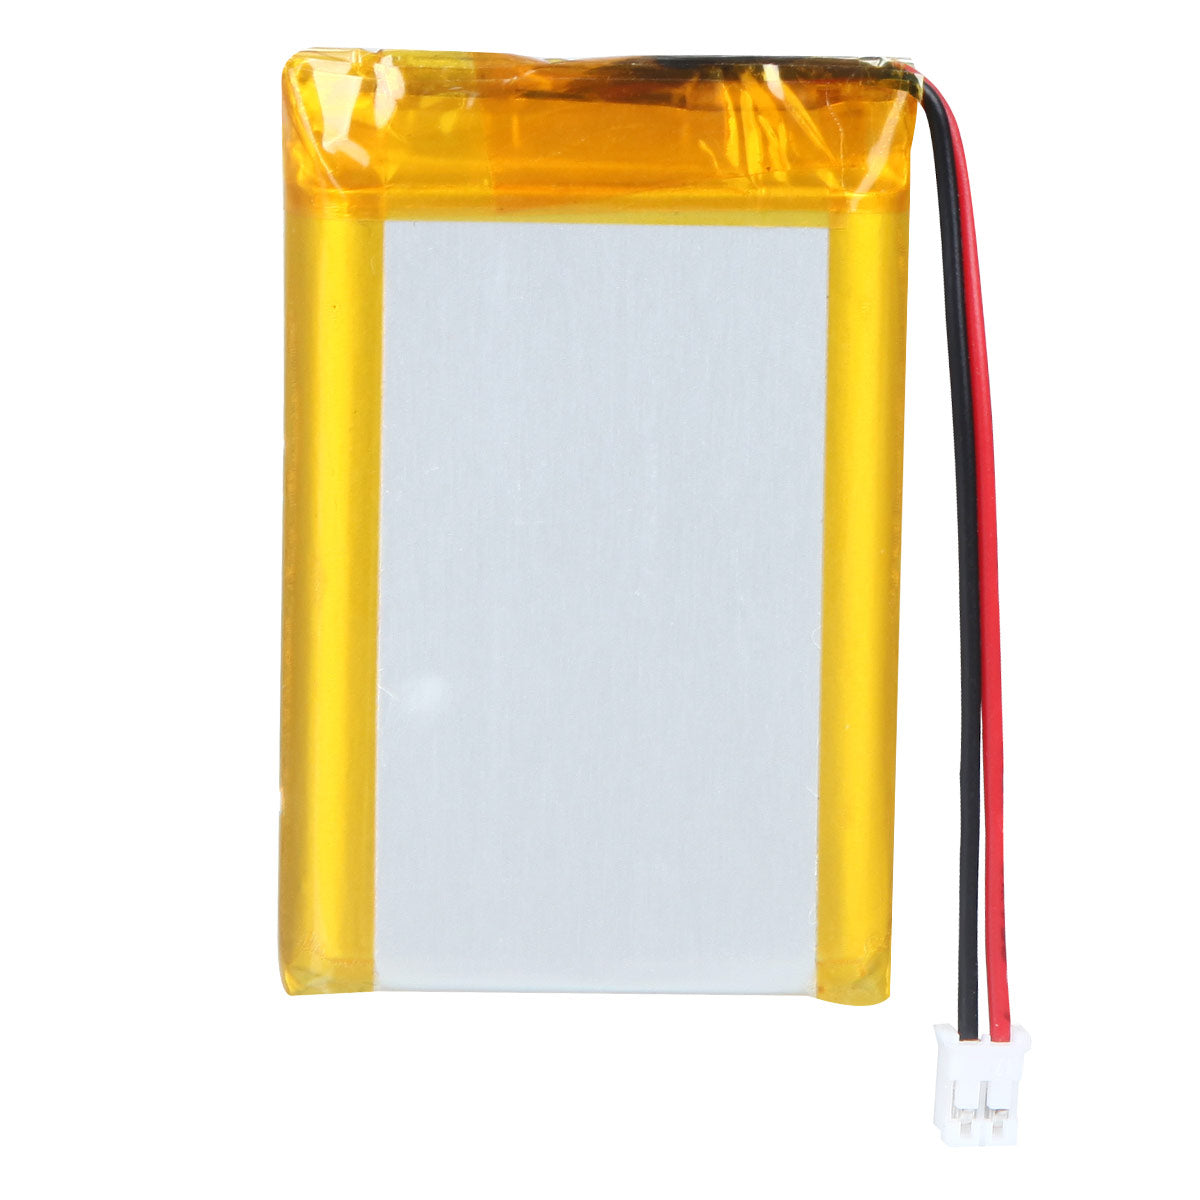 YDL 3.7V 1300mAh 803550 Lithium Polymer Battery Rechargeable Lithium Polymer ion Battery Pack